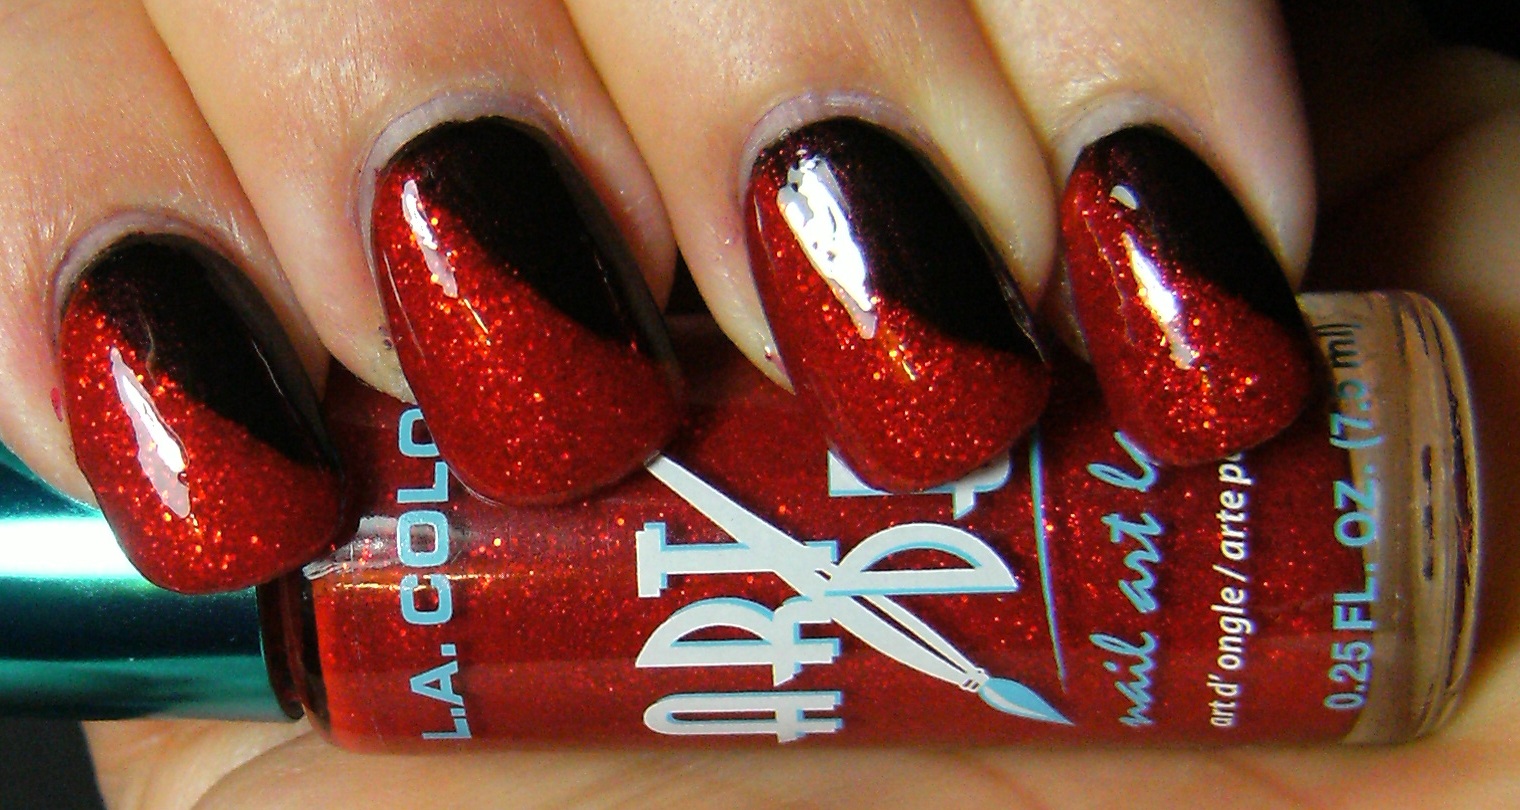 1. Sinful Colors Nail Polish in "Memorial Day Red" - wide 6